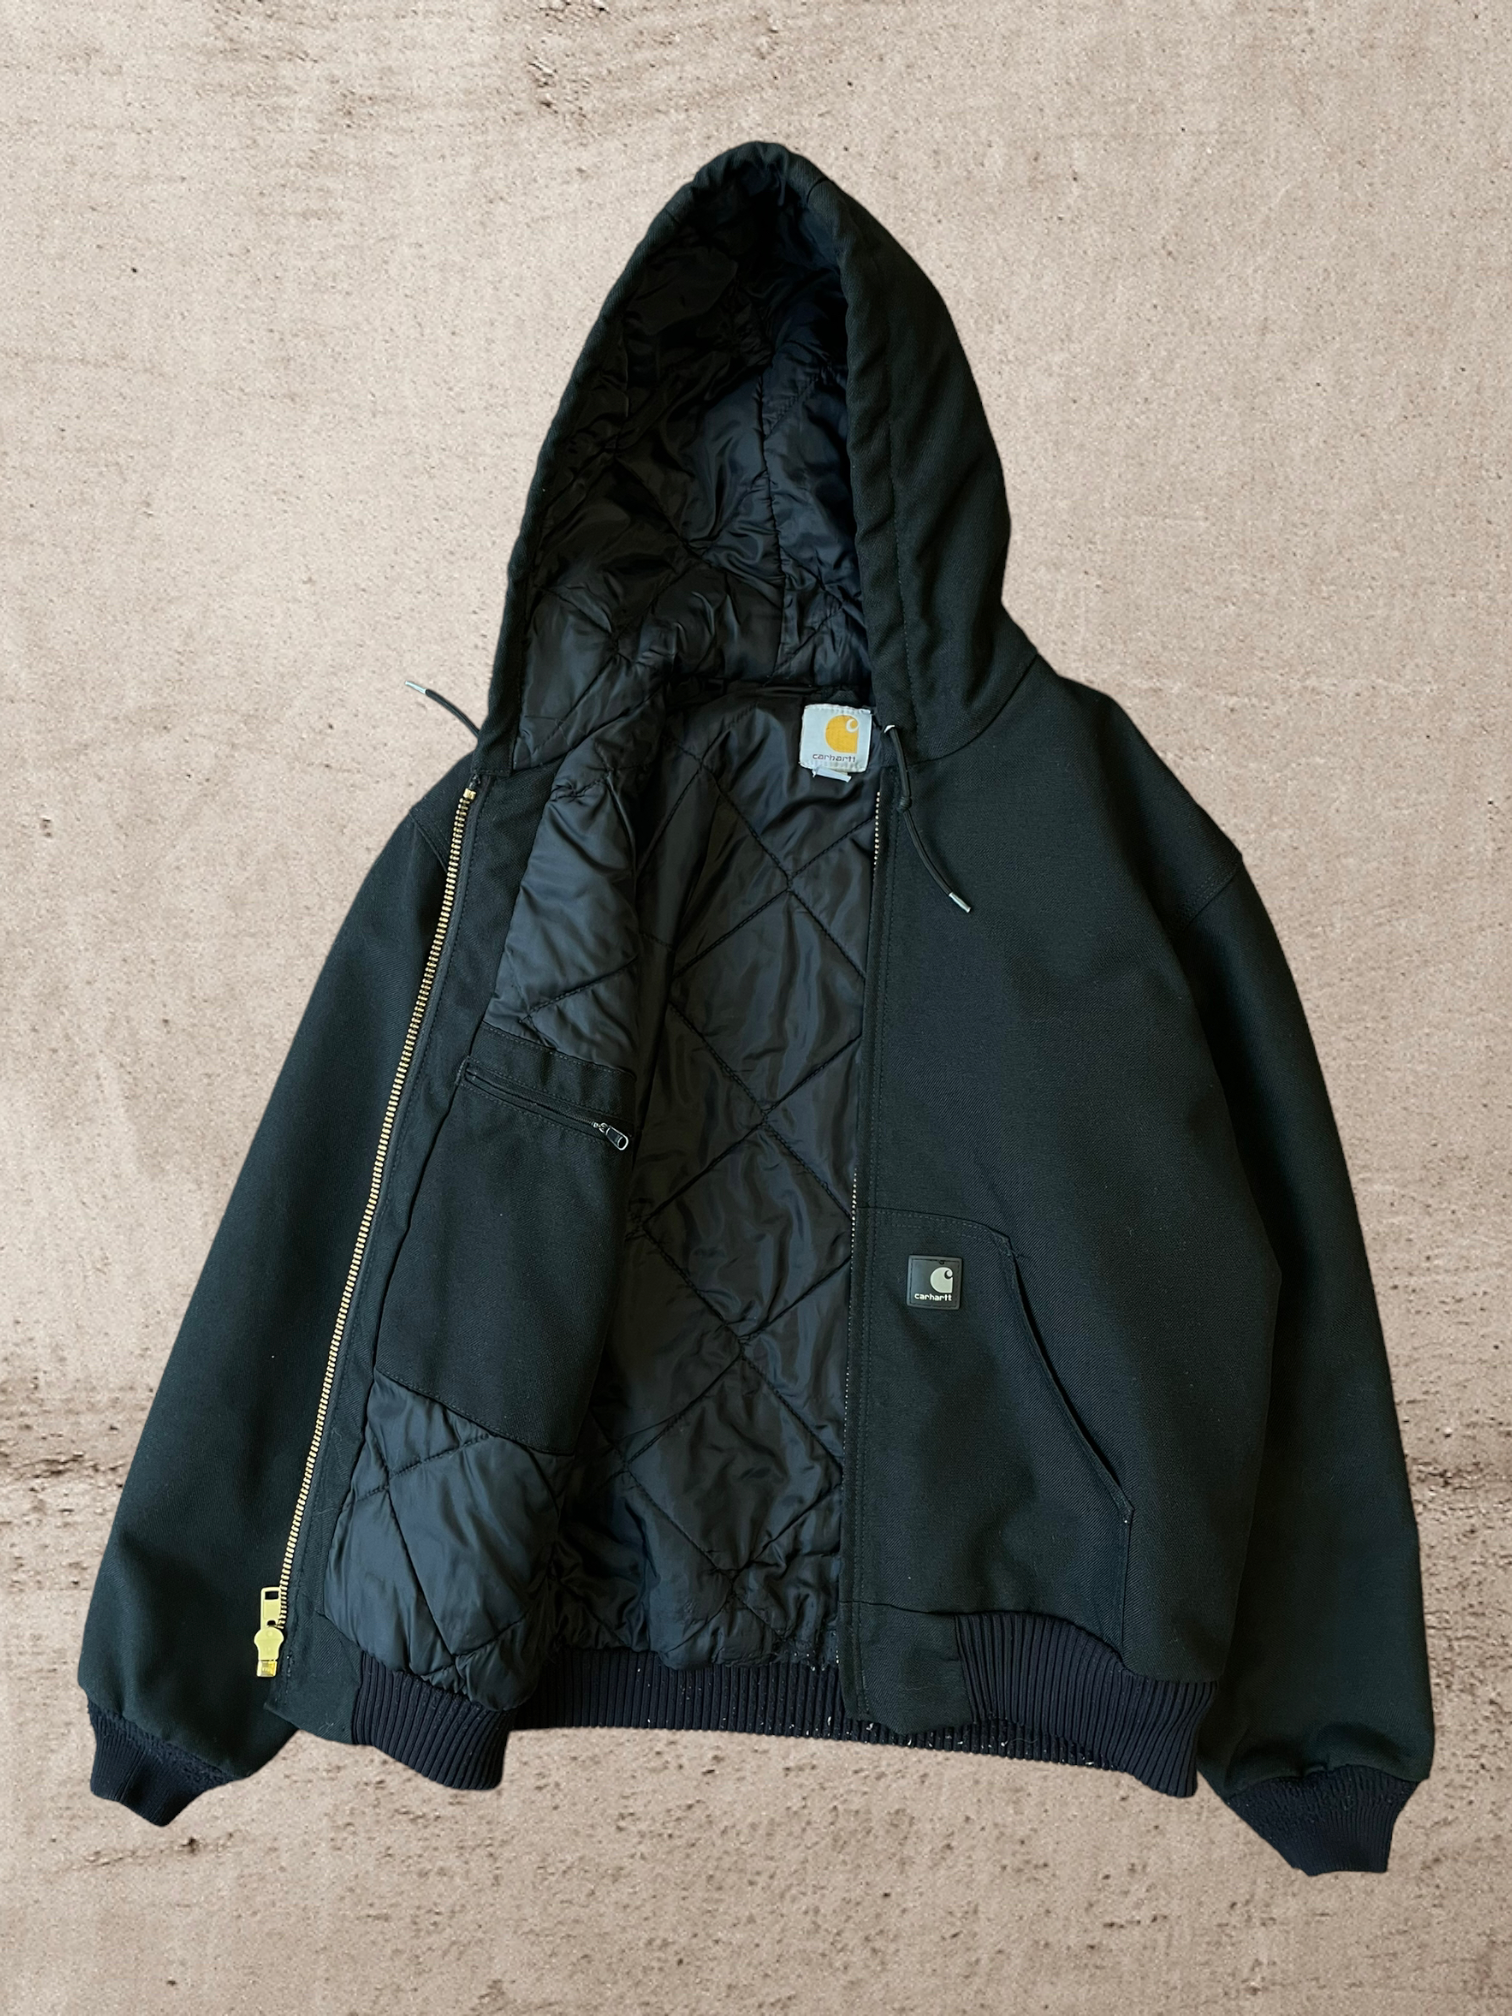 90s Carhartt Quilted Lined Jacket - Small/Medium